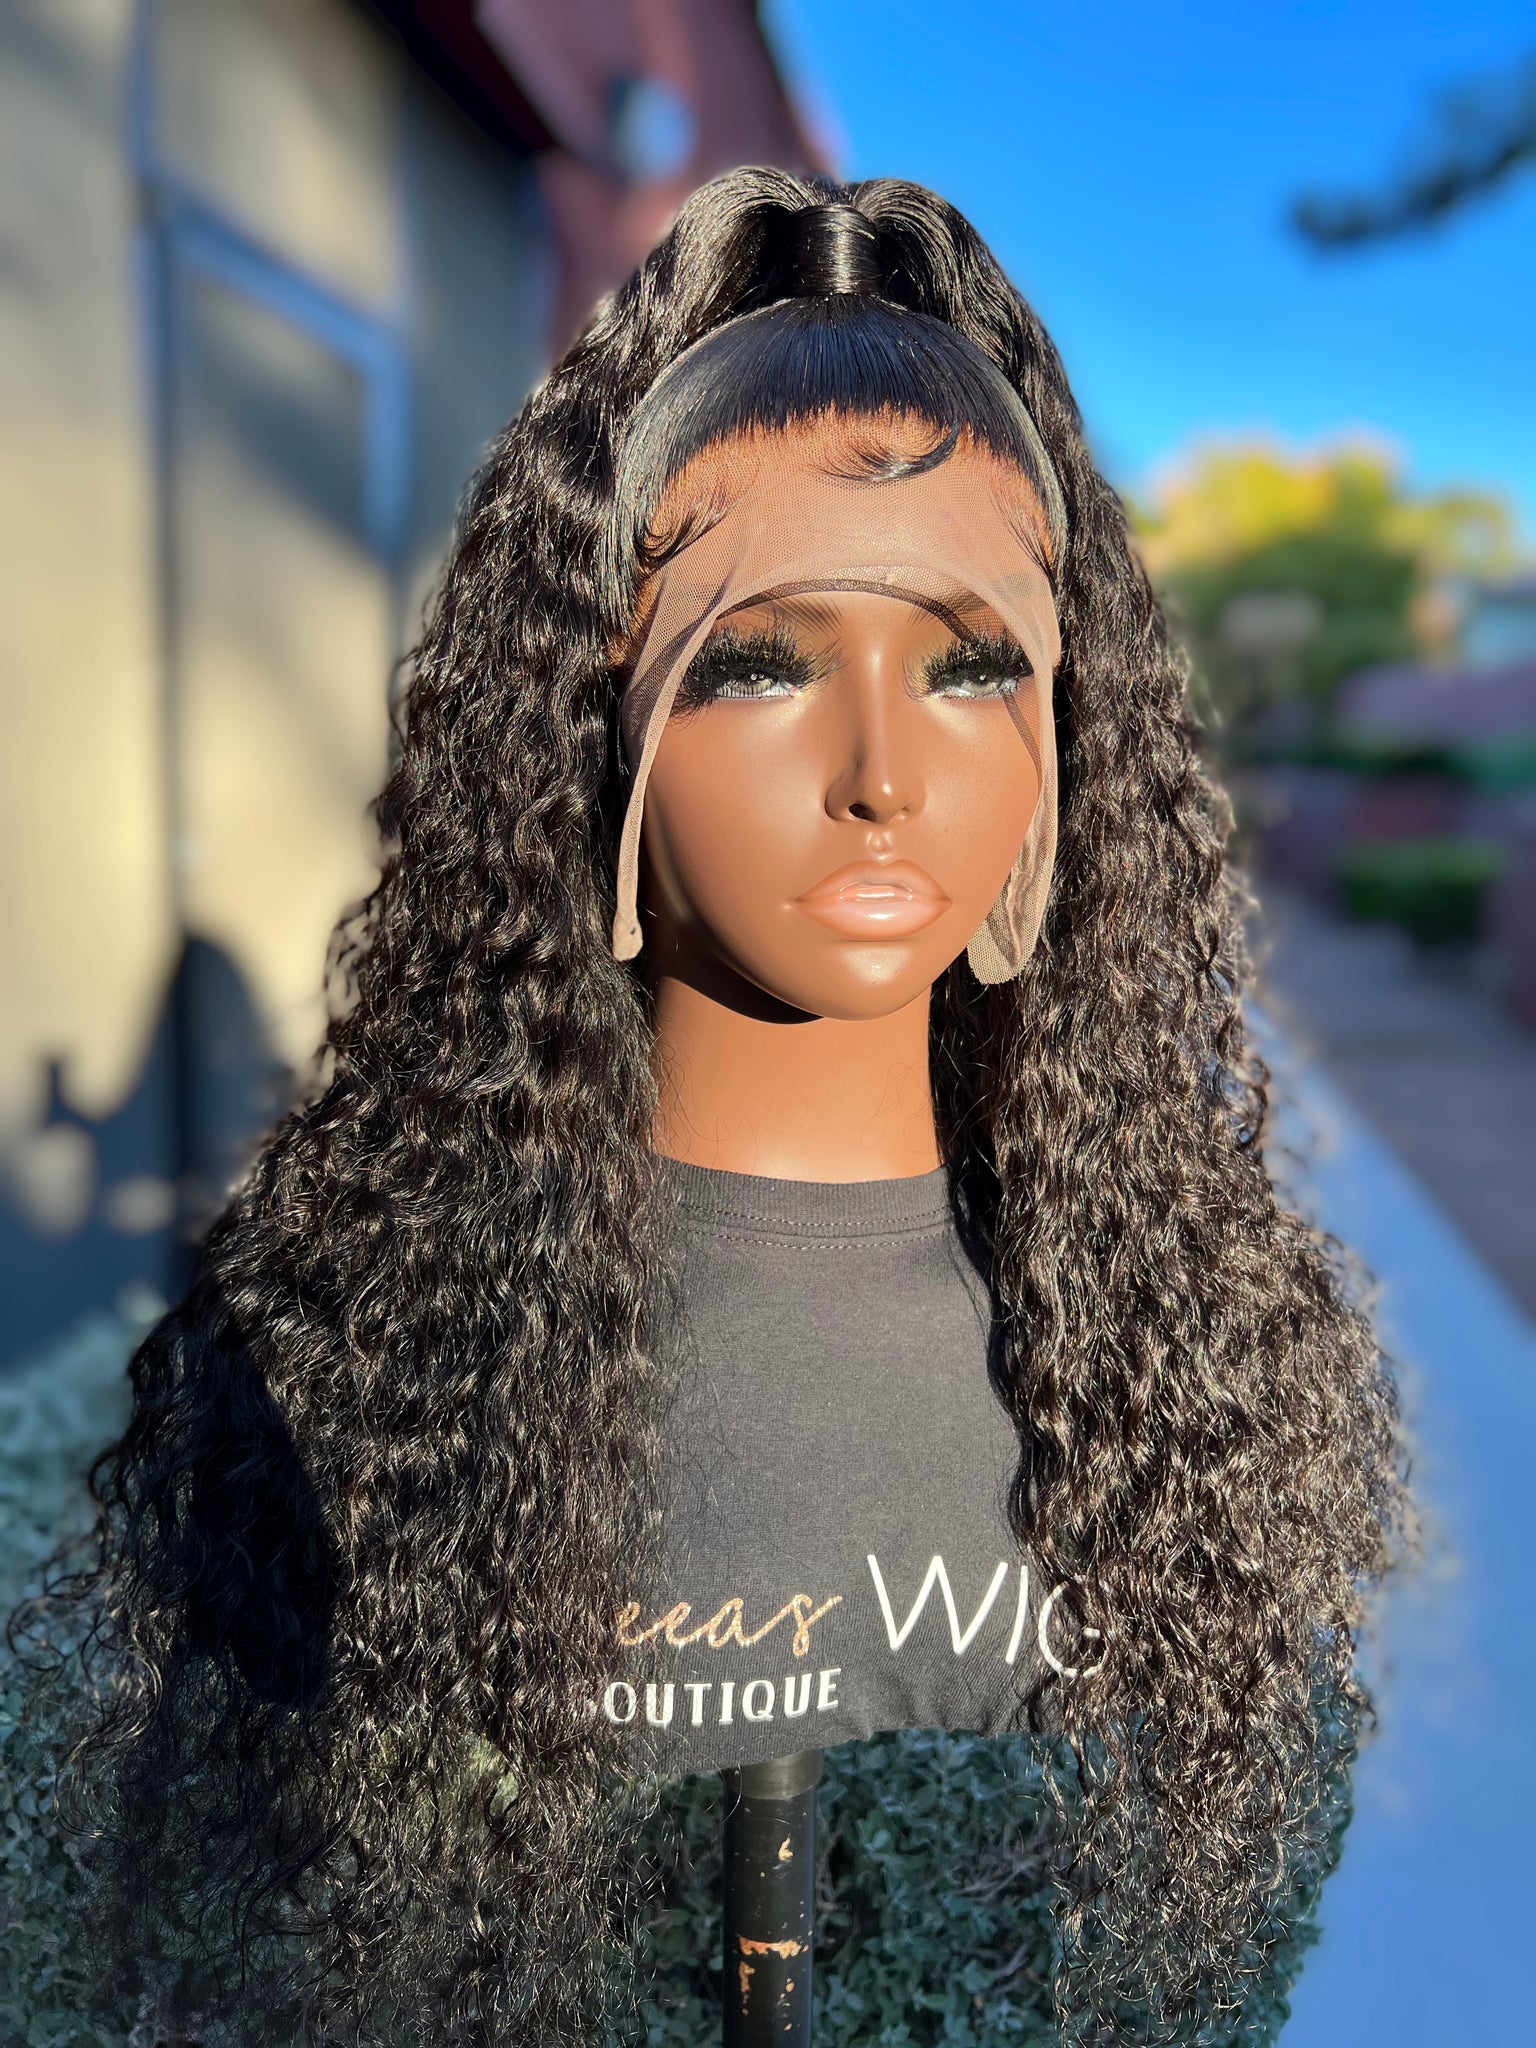 WATER WAVE HALF UP HALF DOWN LACE FRONTAL WIG 22 INCHES – Styles